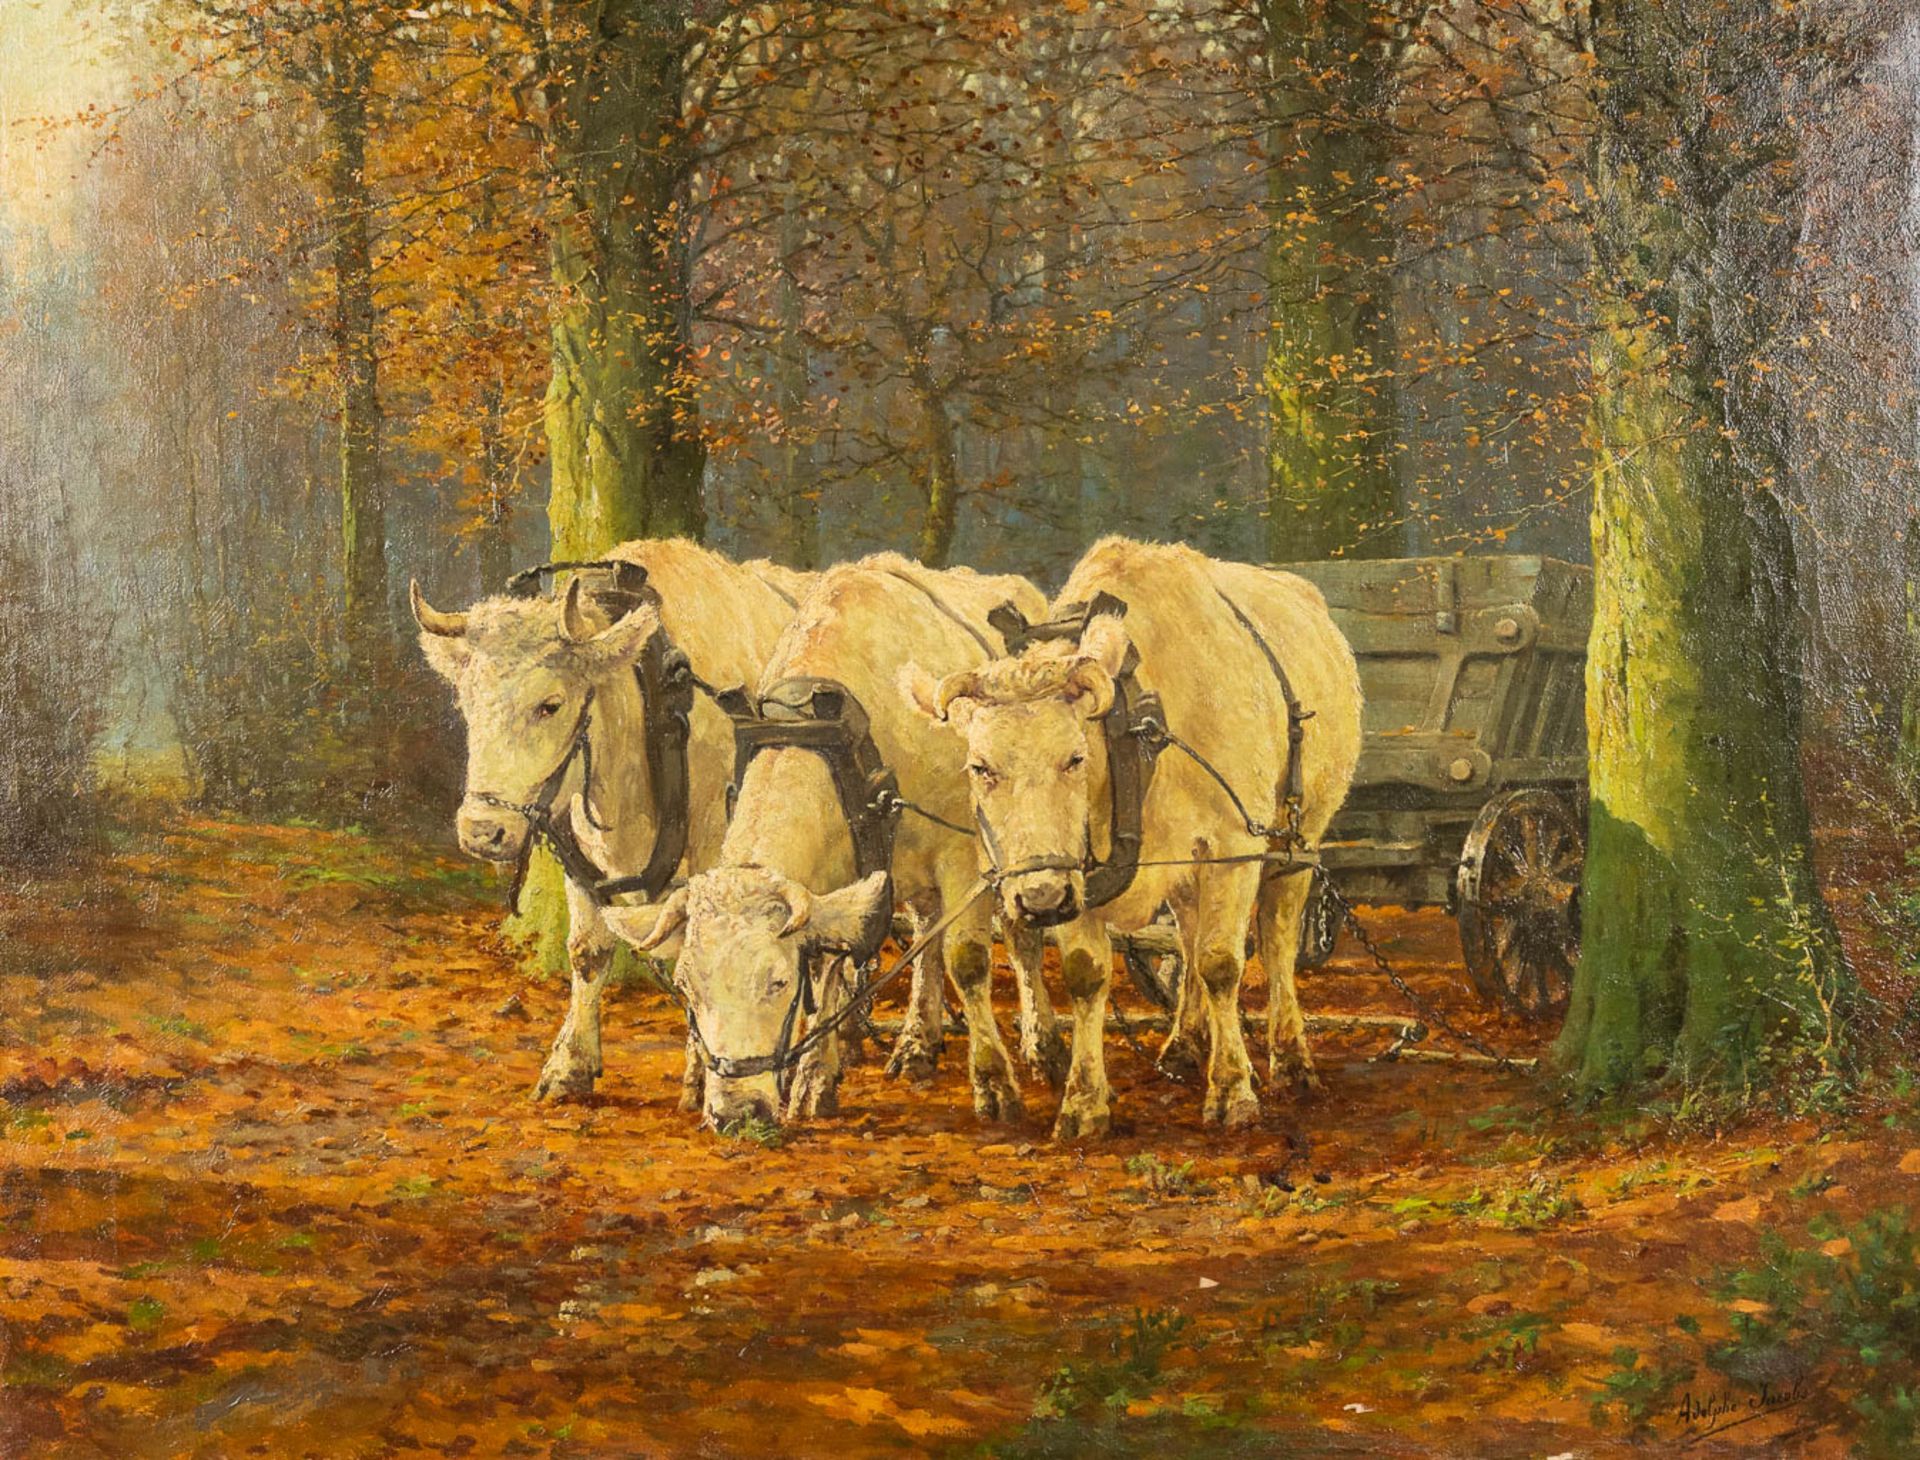 Adolphe JACOBS (1859-1940) 'The Cows', oil on canvas. (W:105 x H:82 cm)